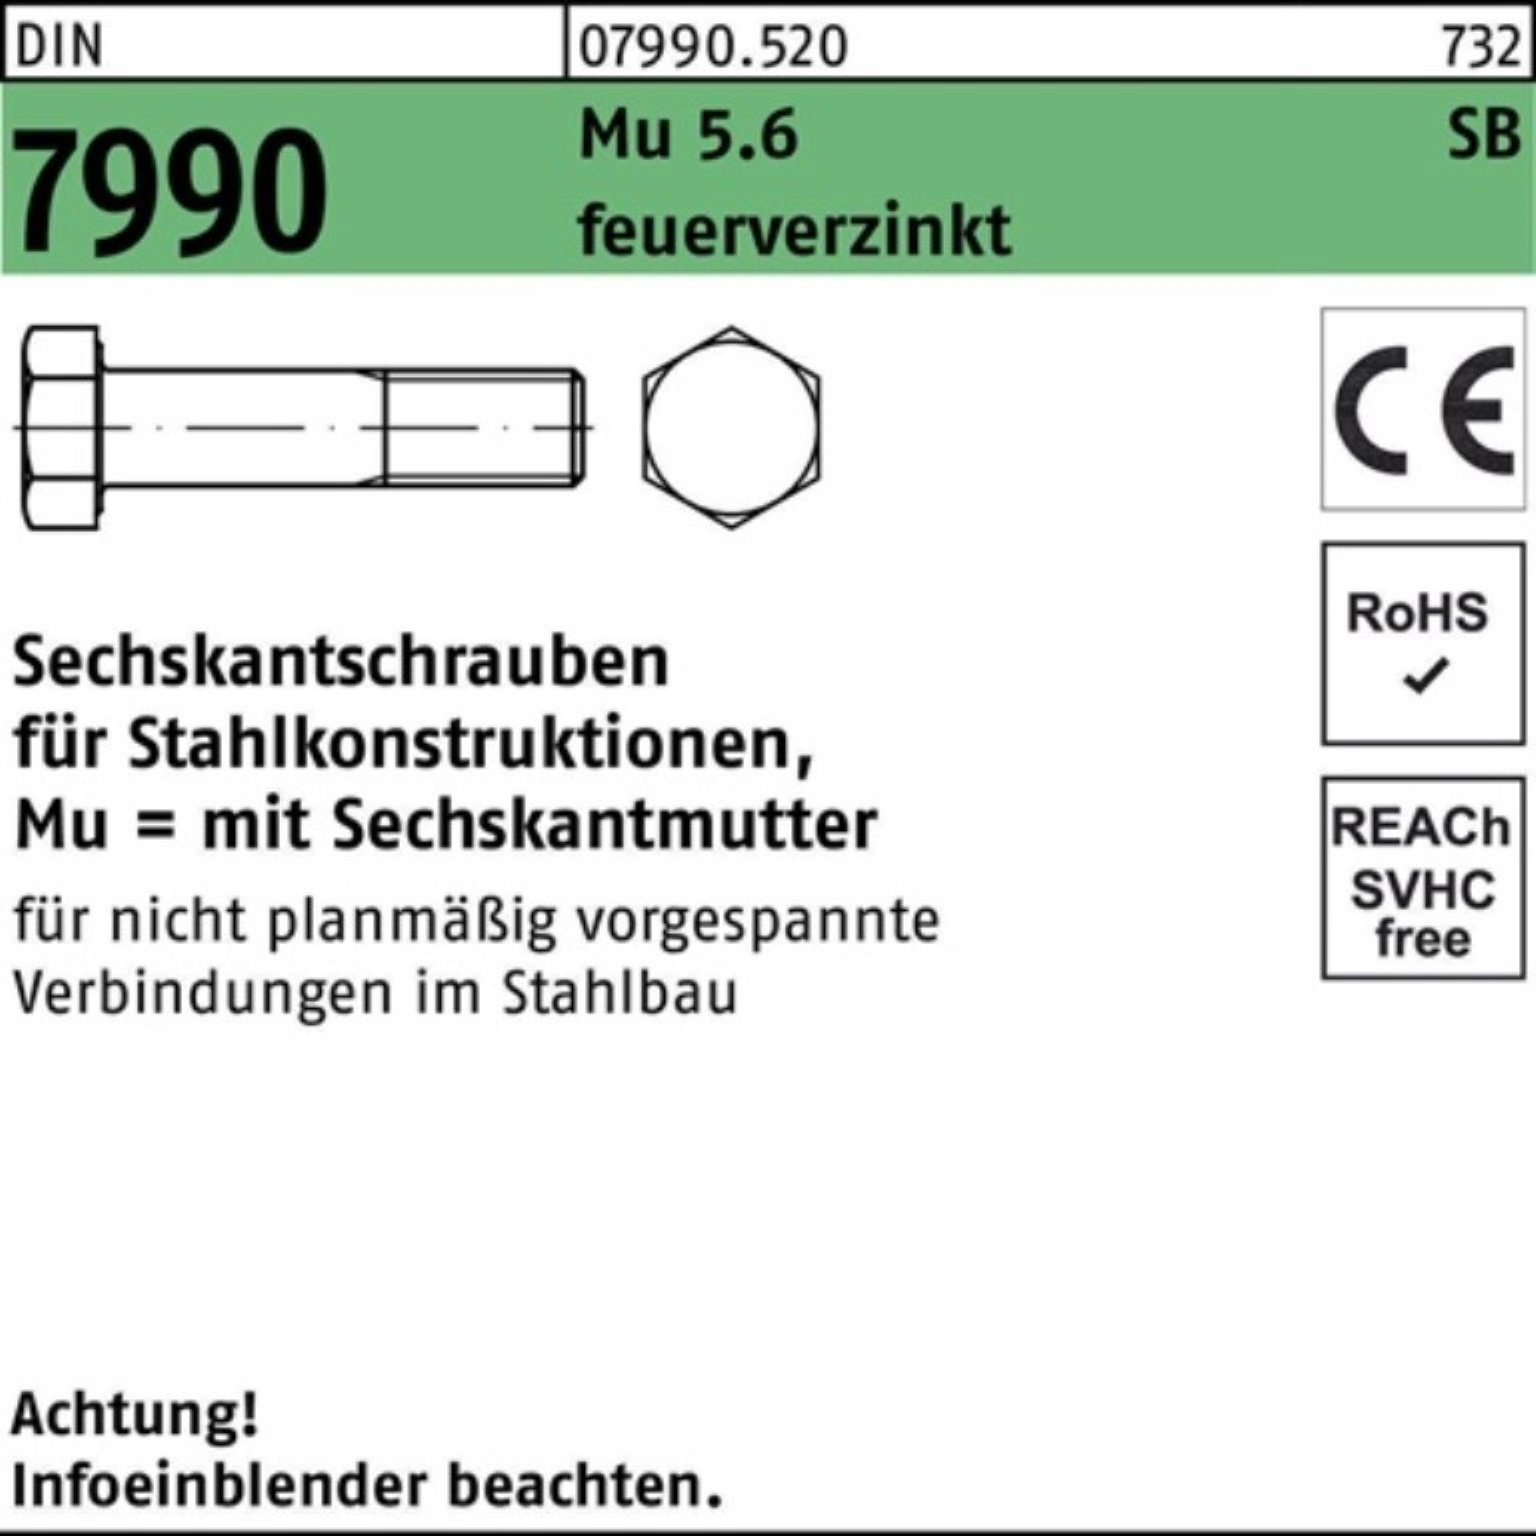 CE Sechskantmutter 7990 100er Sechskantmutter Sechskantschraube fe 5.6 Reyher DIN Pack M12x60